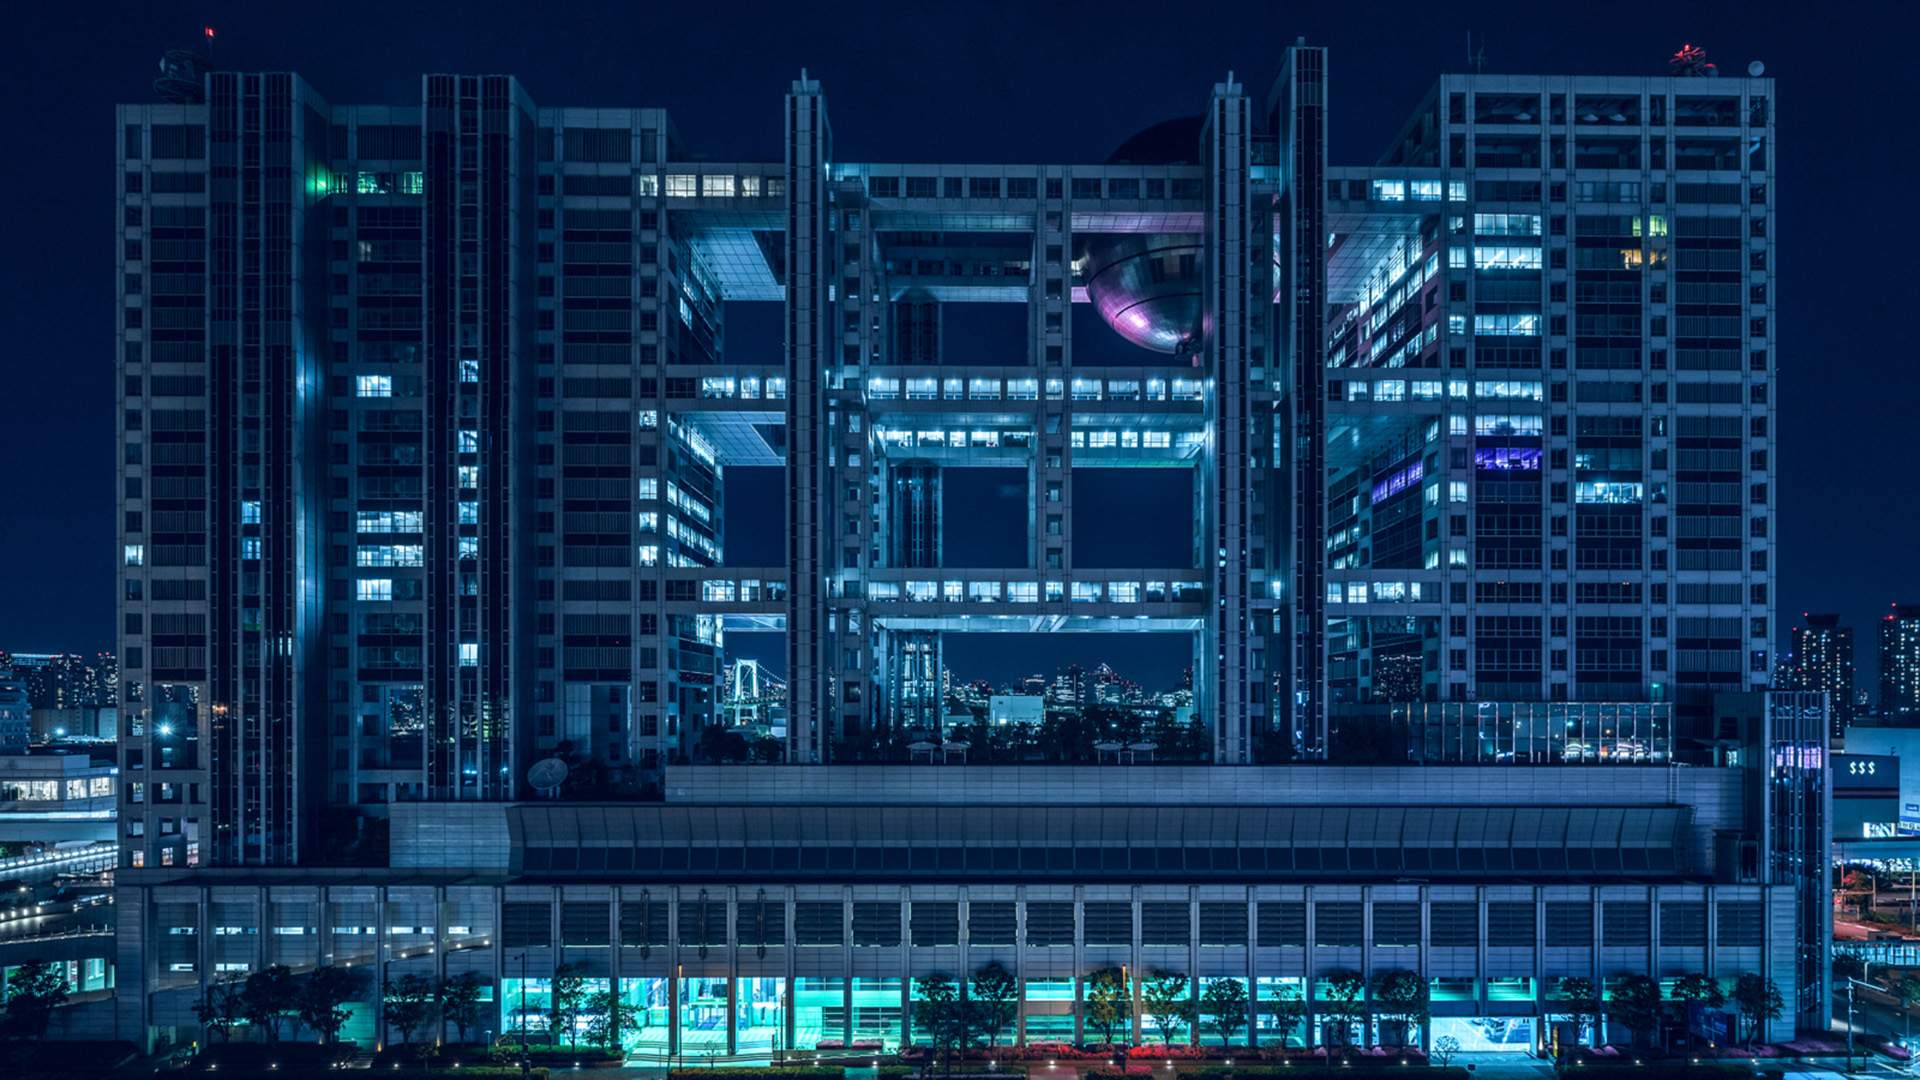 This Photography Series Turns Tokyo Into a Blade Runner-Like Futuristic Realm